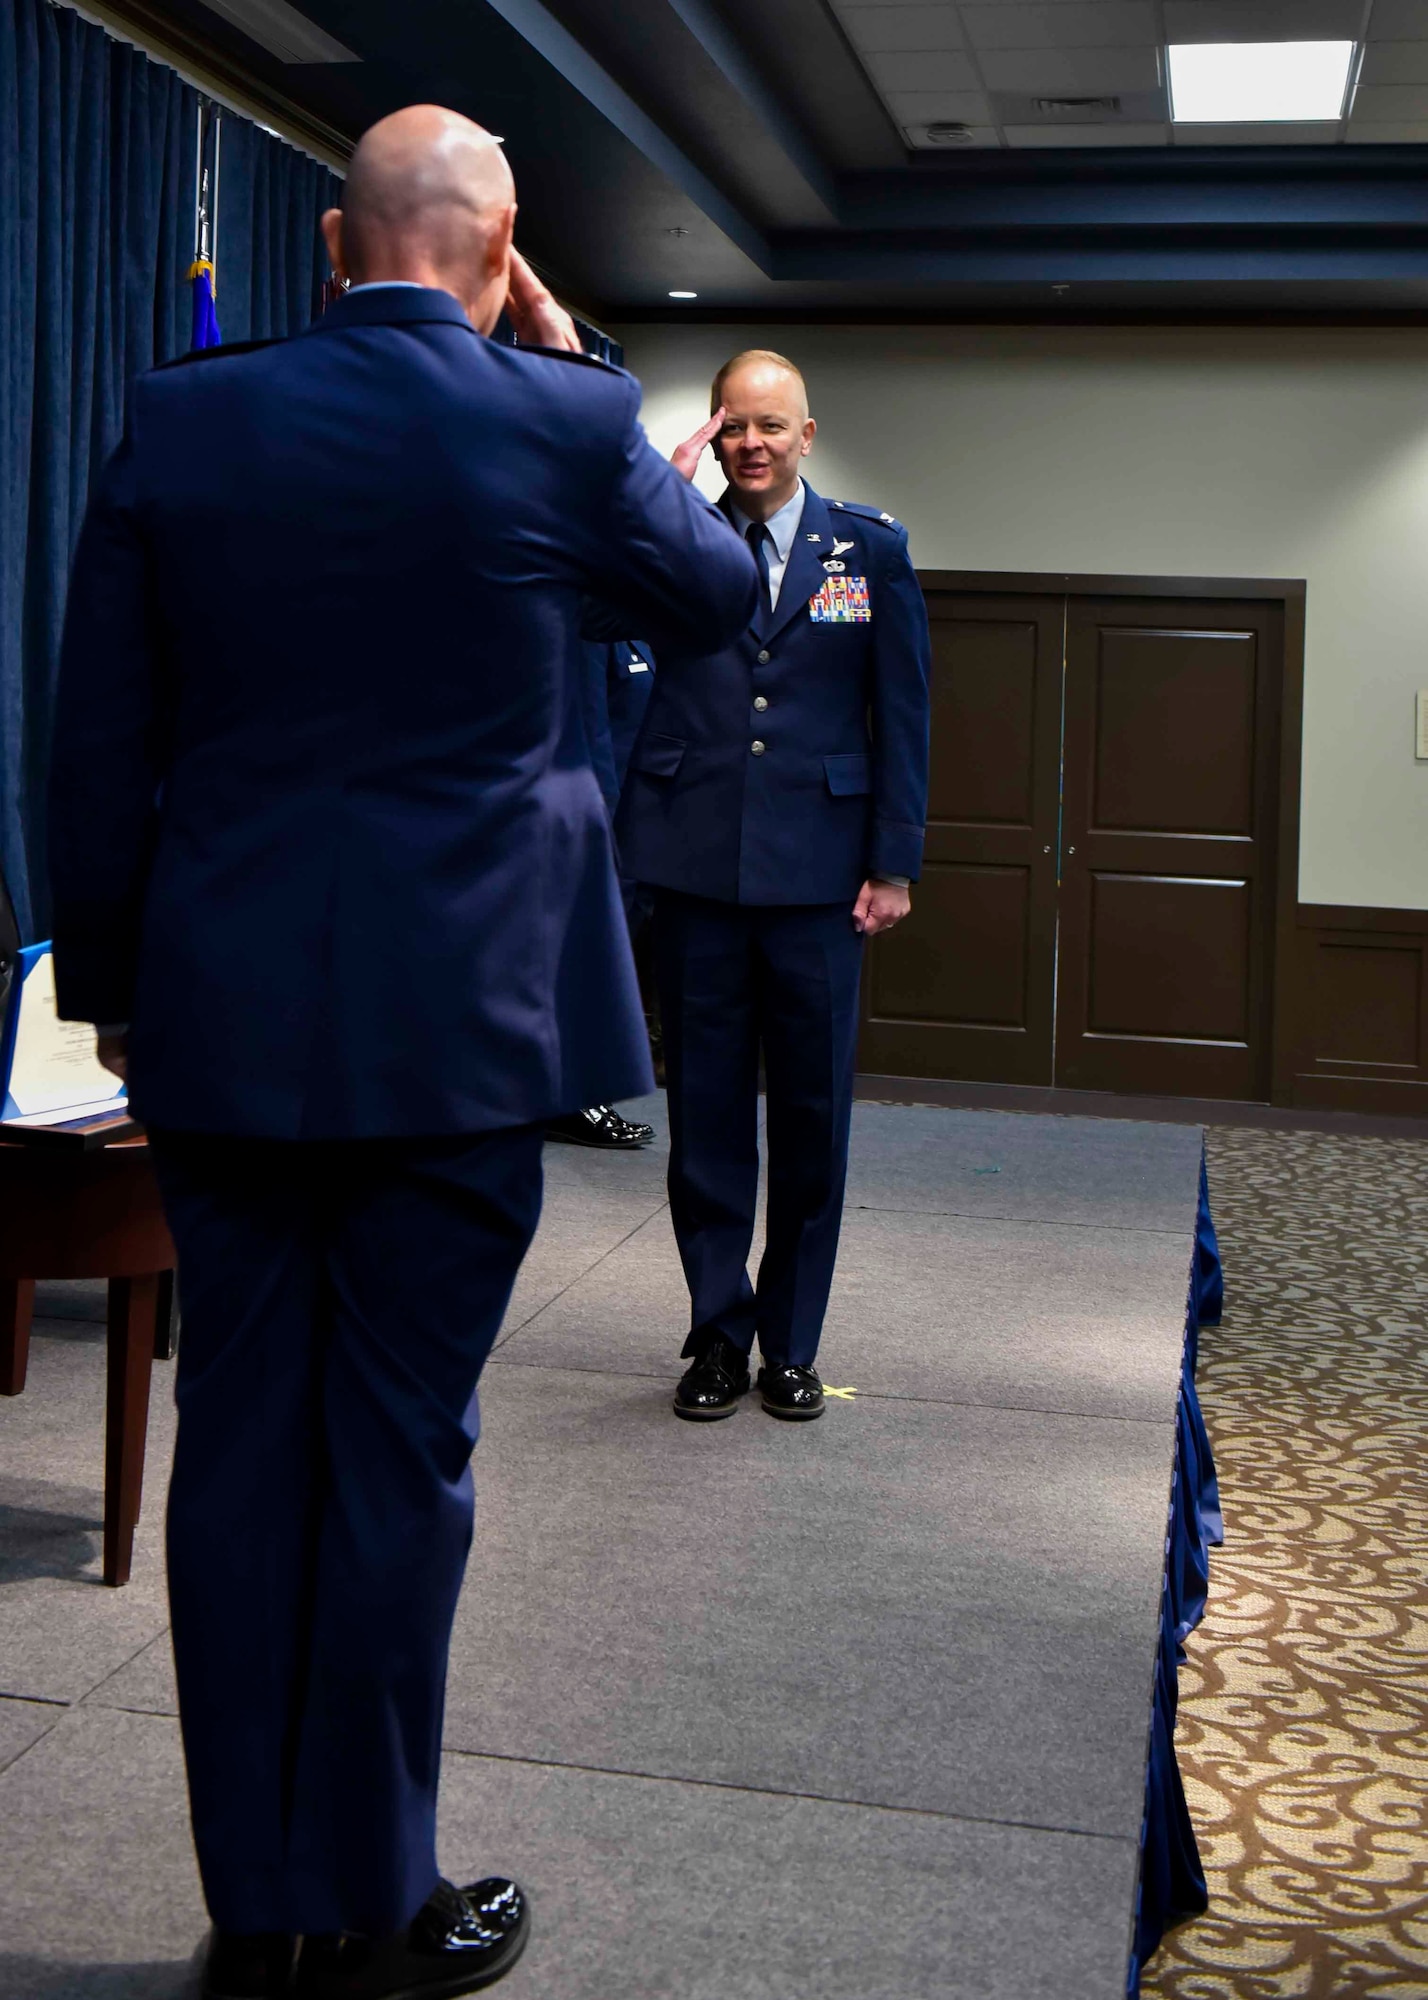 U.S. Air Force Col. Derek Salmi, outgoing 92nd Air Refueling Wing commander, salutes Maj. Gen. Sam Barrett, 18th Air Force commander, during the 92nd ARW change of command ceremony